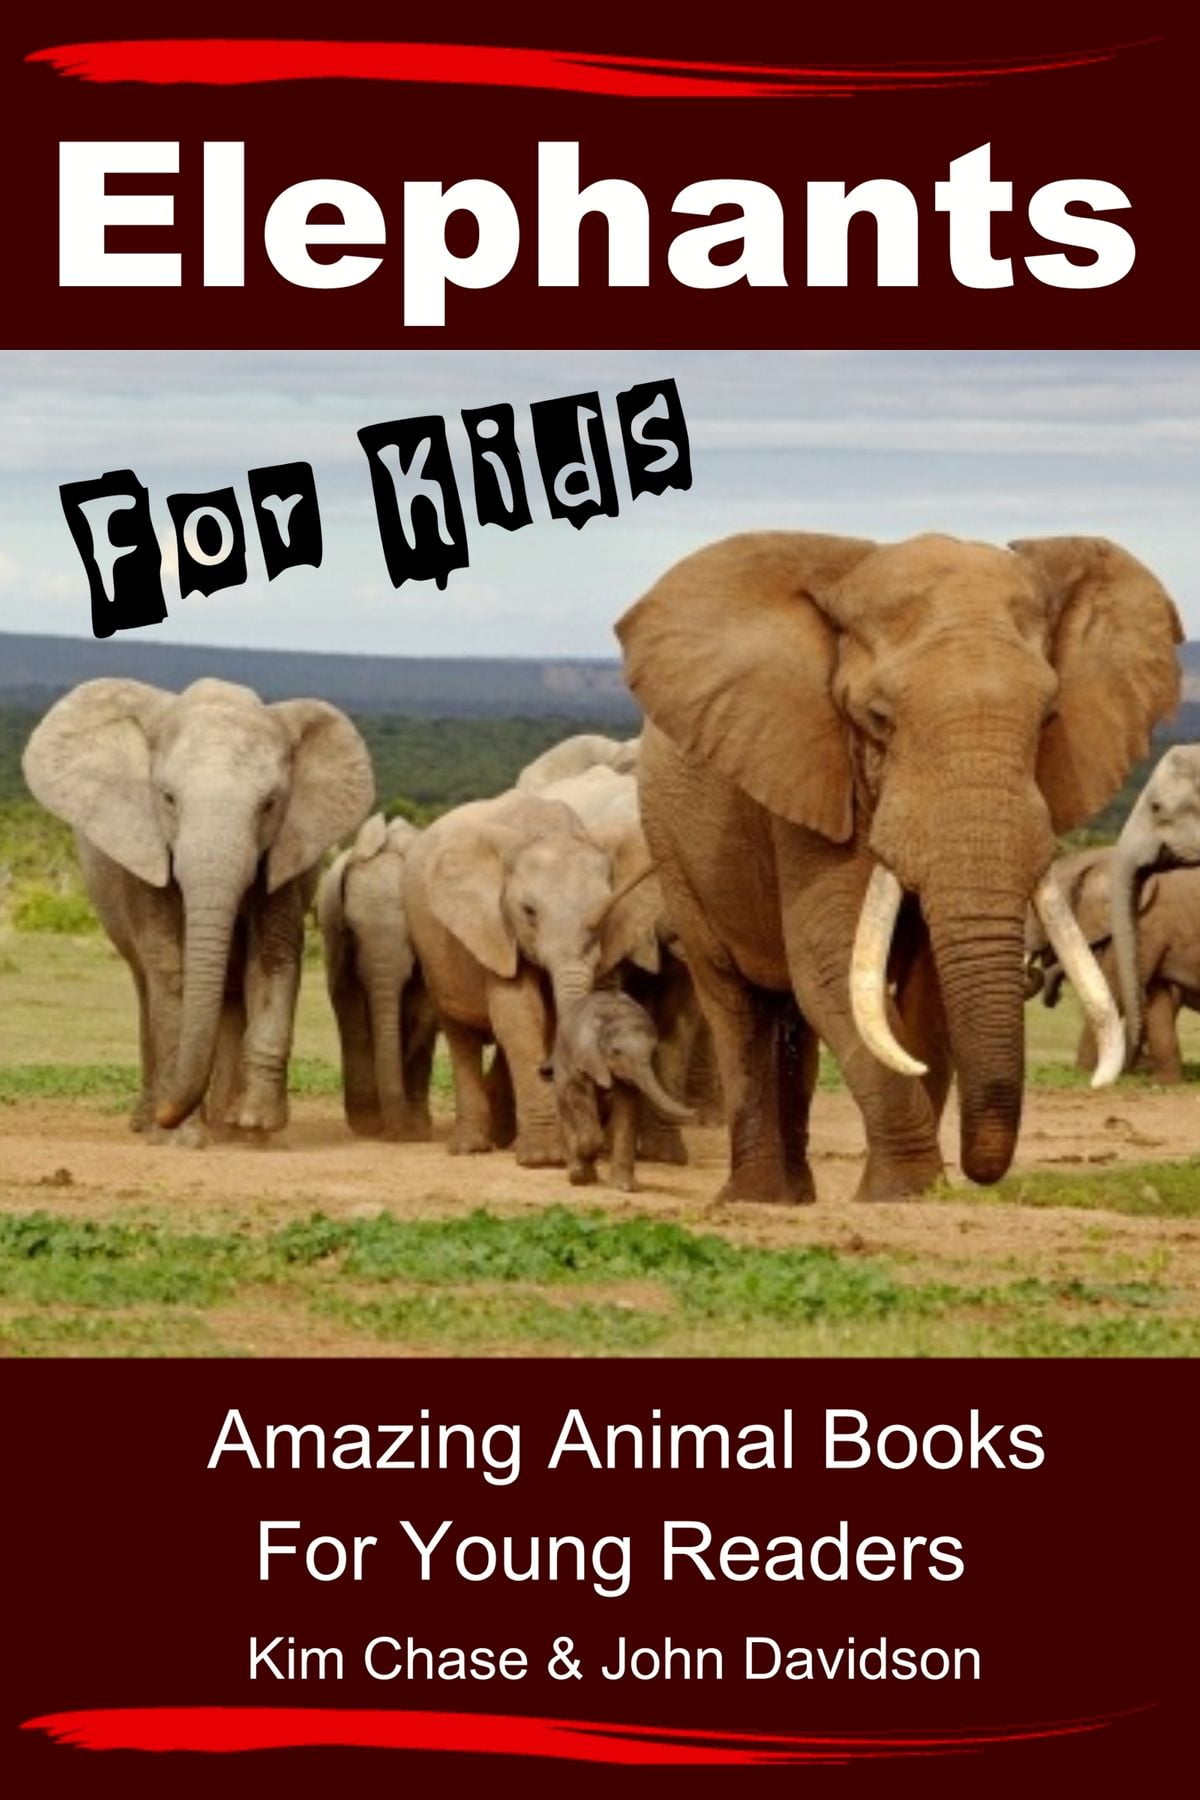 Elephants For Kids: Amazing Animal Books for Young Readers - eBook